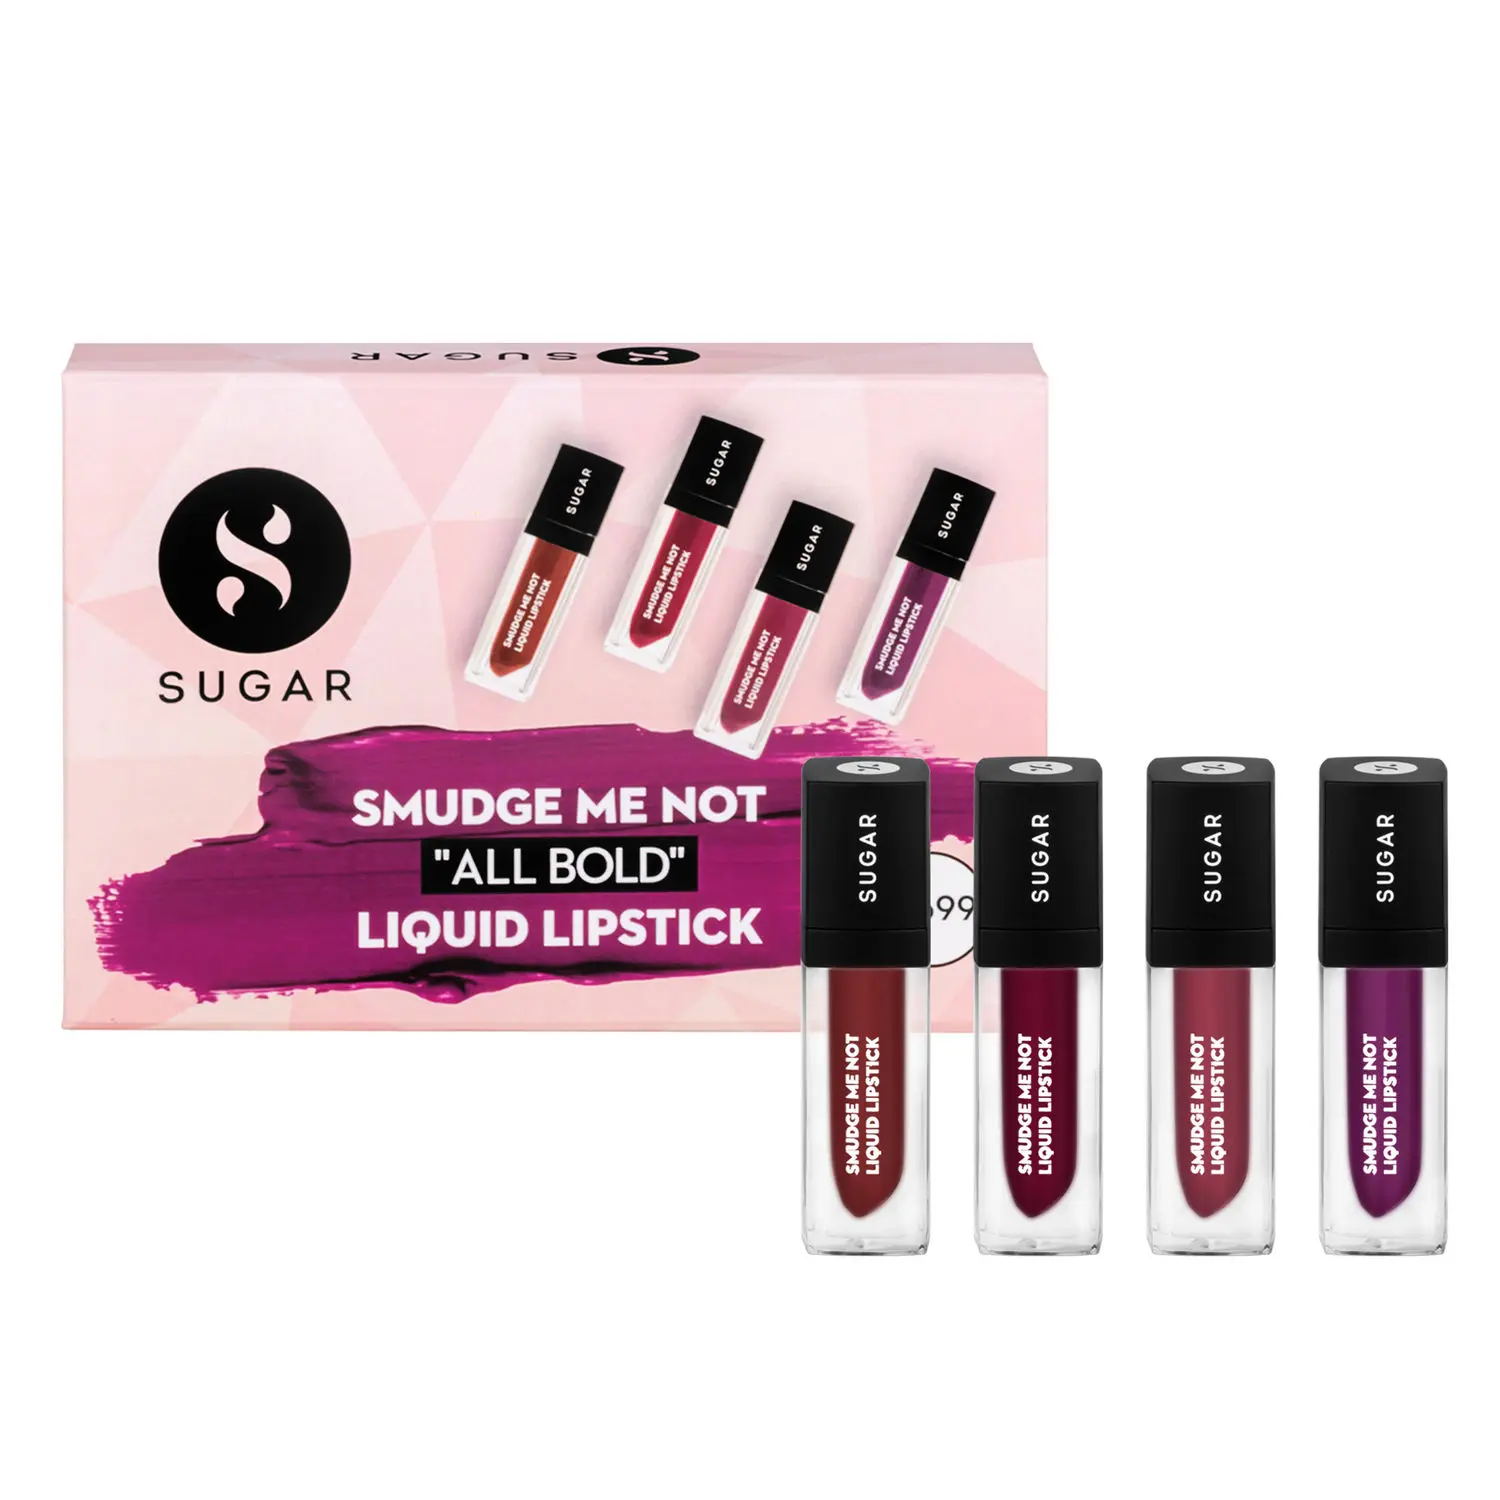 SUGAR Cosmetics Smudge Me Not"All Bold" Liquid Lipstick Gift Box Intensely Pigmented Liquid Matte Finish, Longwearing Formula, Smudgeproof